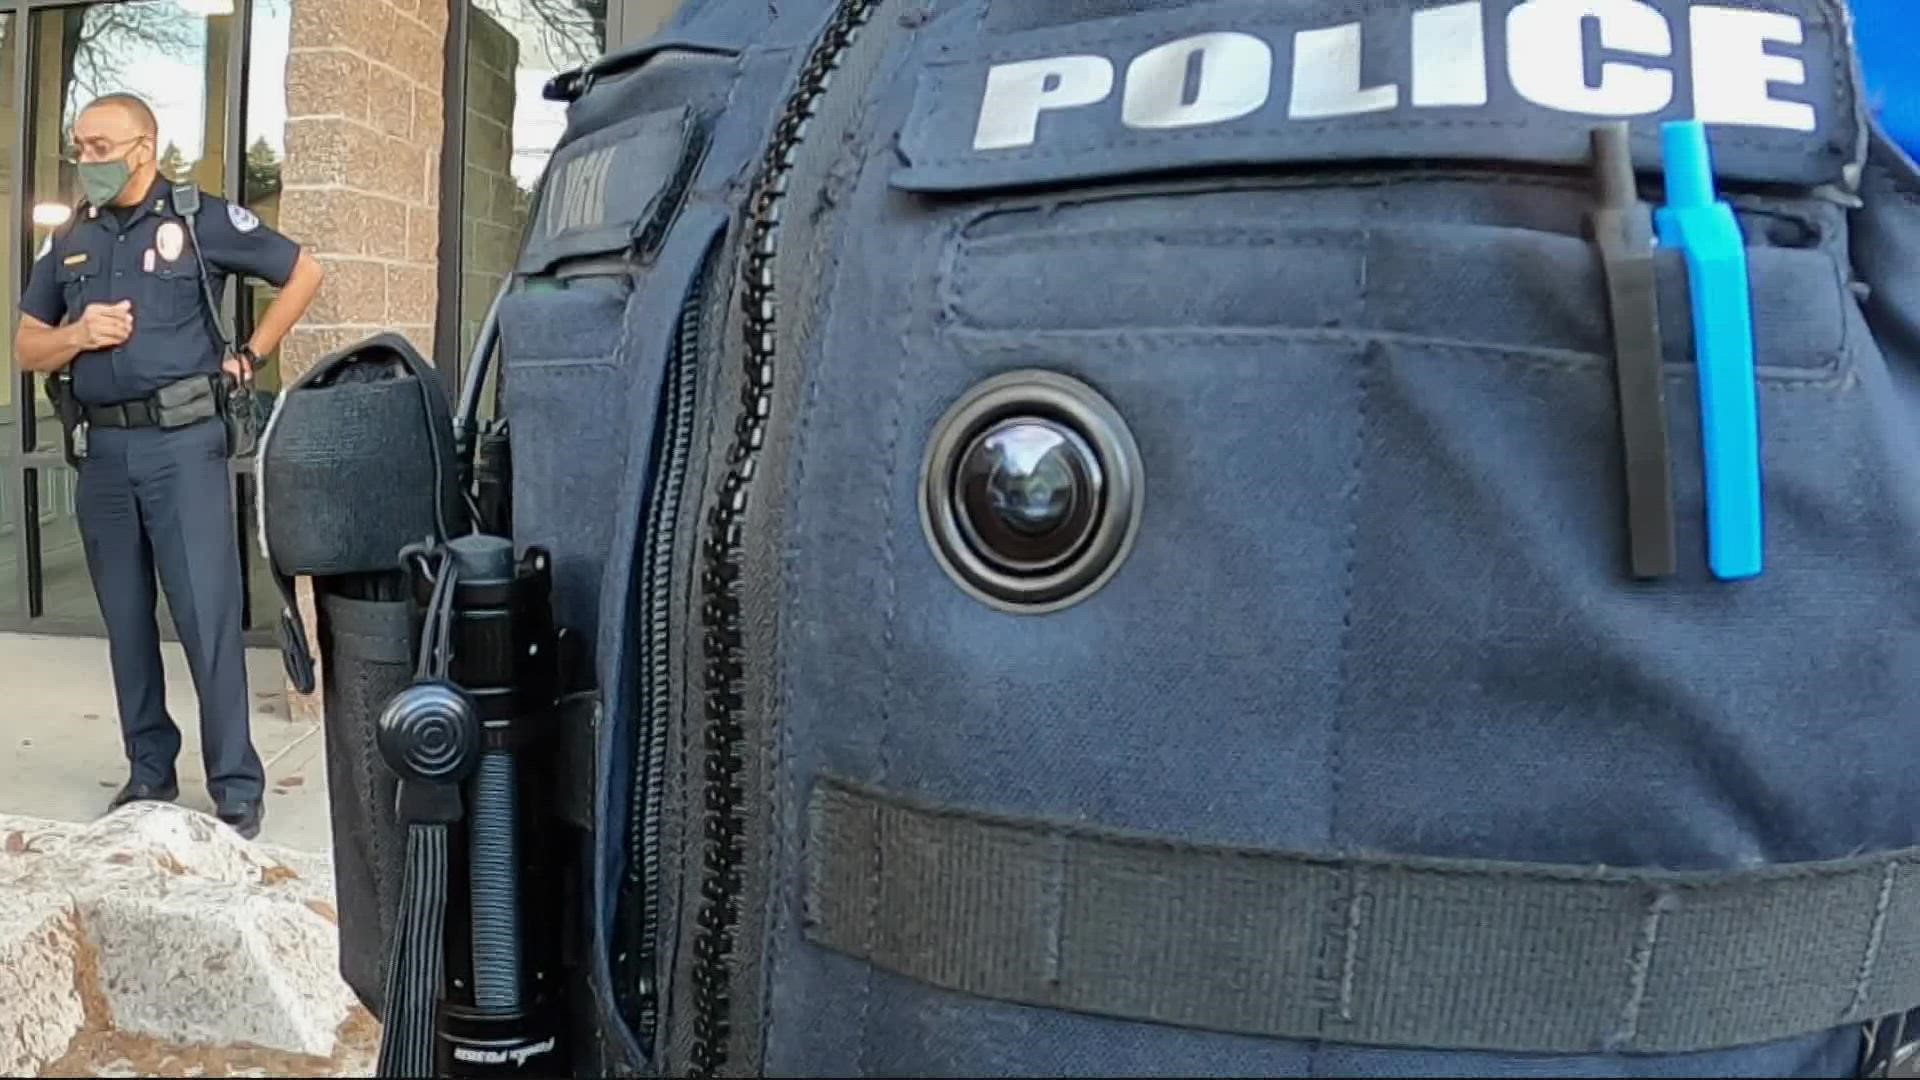 A handful of Vancouver Police officers are testing out body cameras. It's part of a bigger effort to equip all officers and vehicles with cameras by next year.